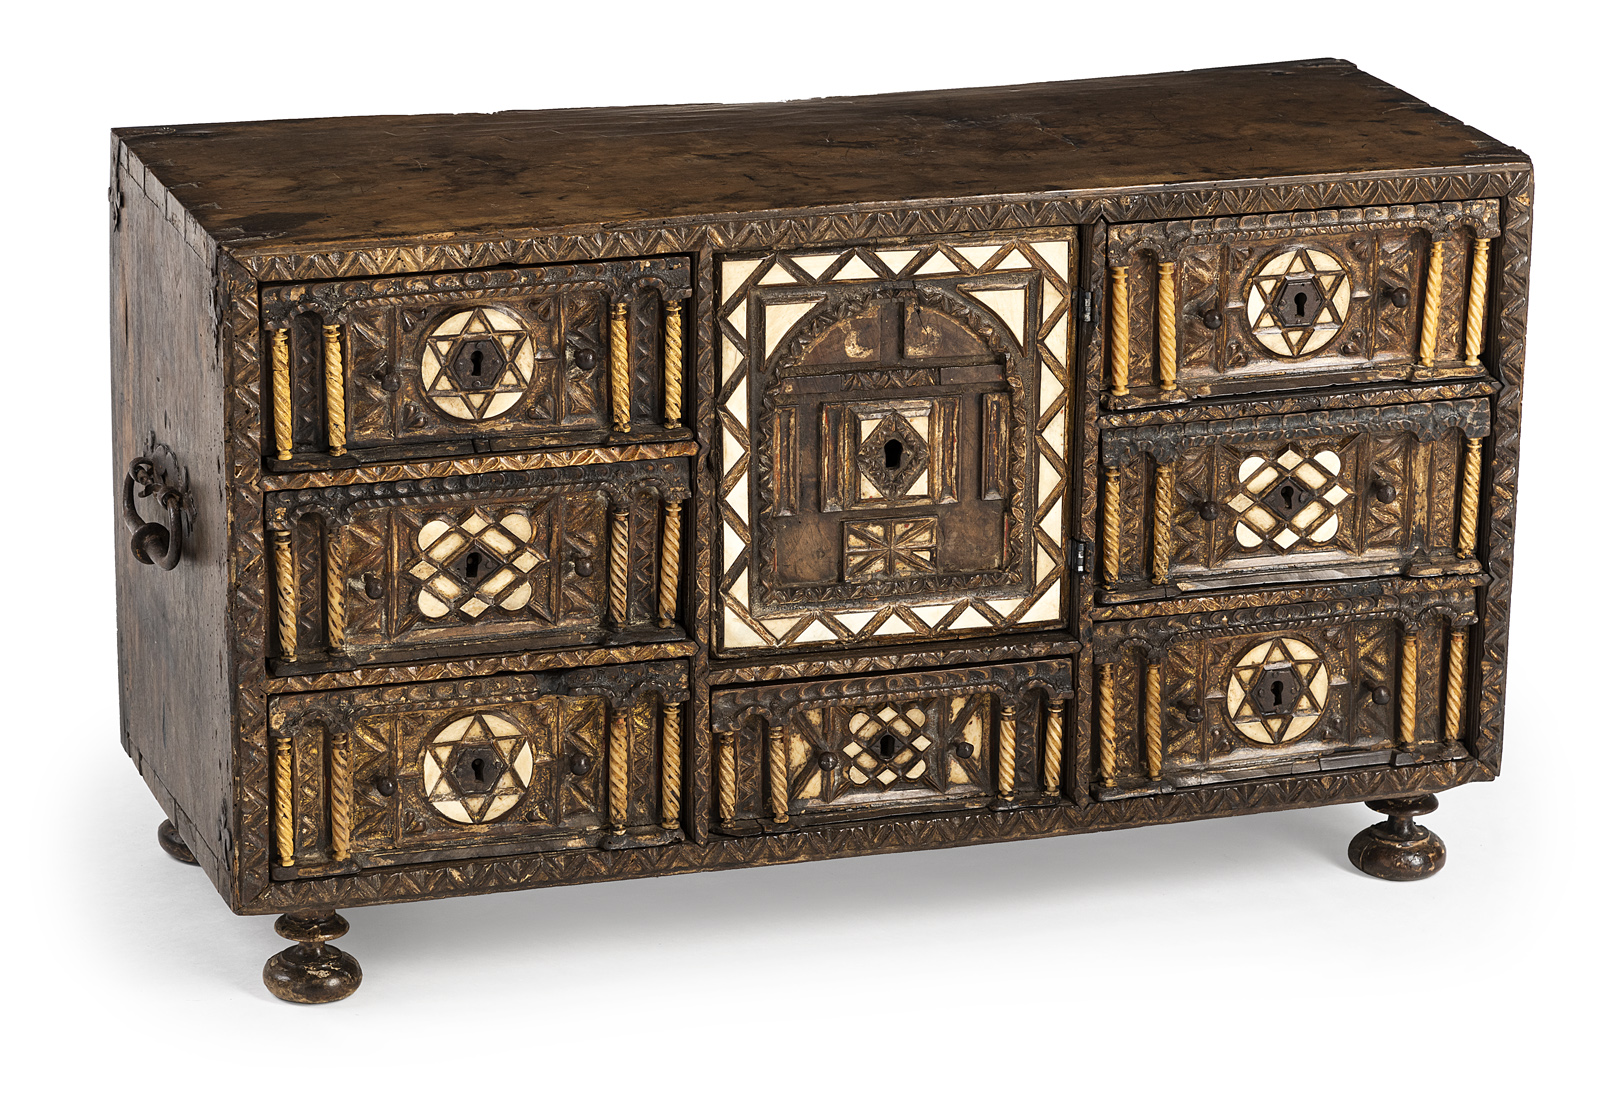 A FINE SPANISH IRON MOUNTED RENAISSANCE CABINET - SO-CALLED VARGUENO